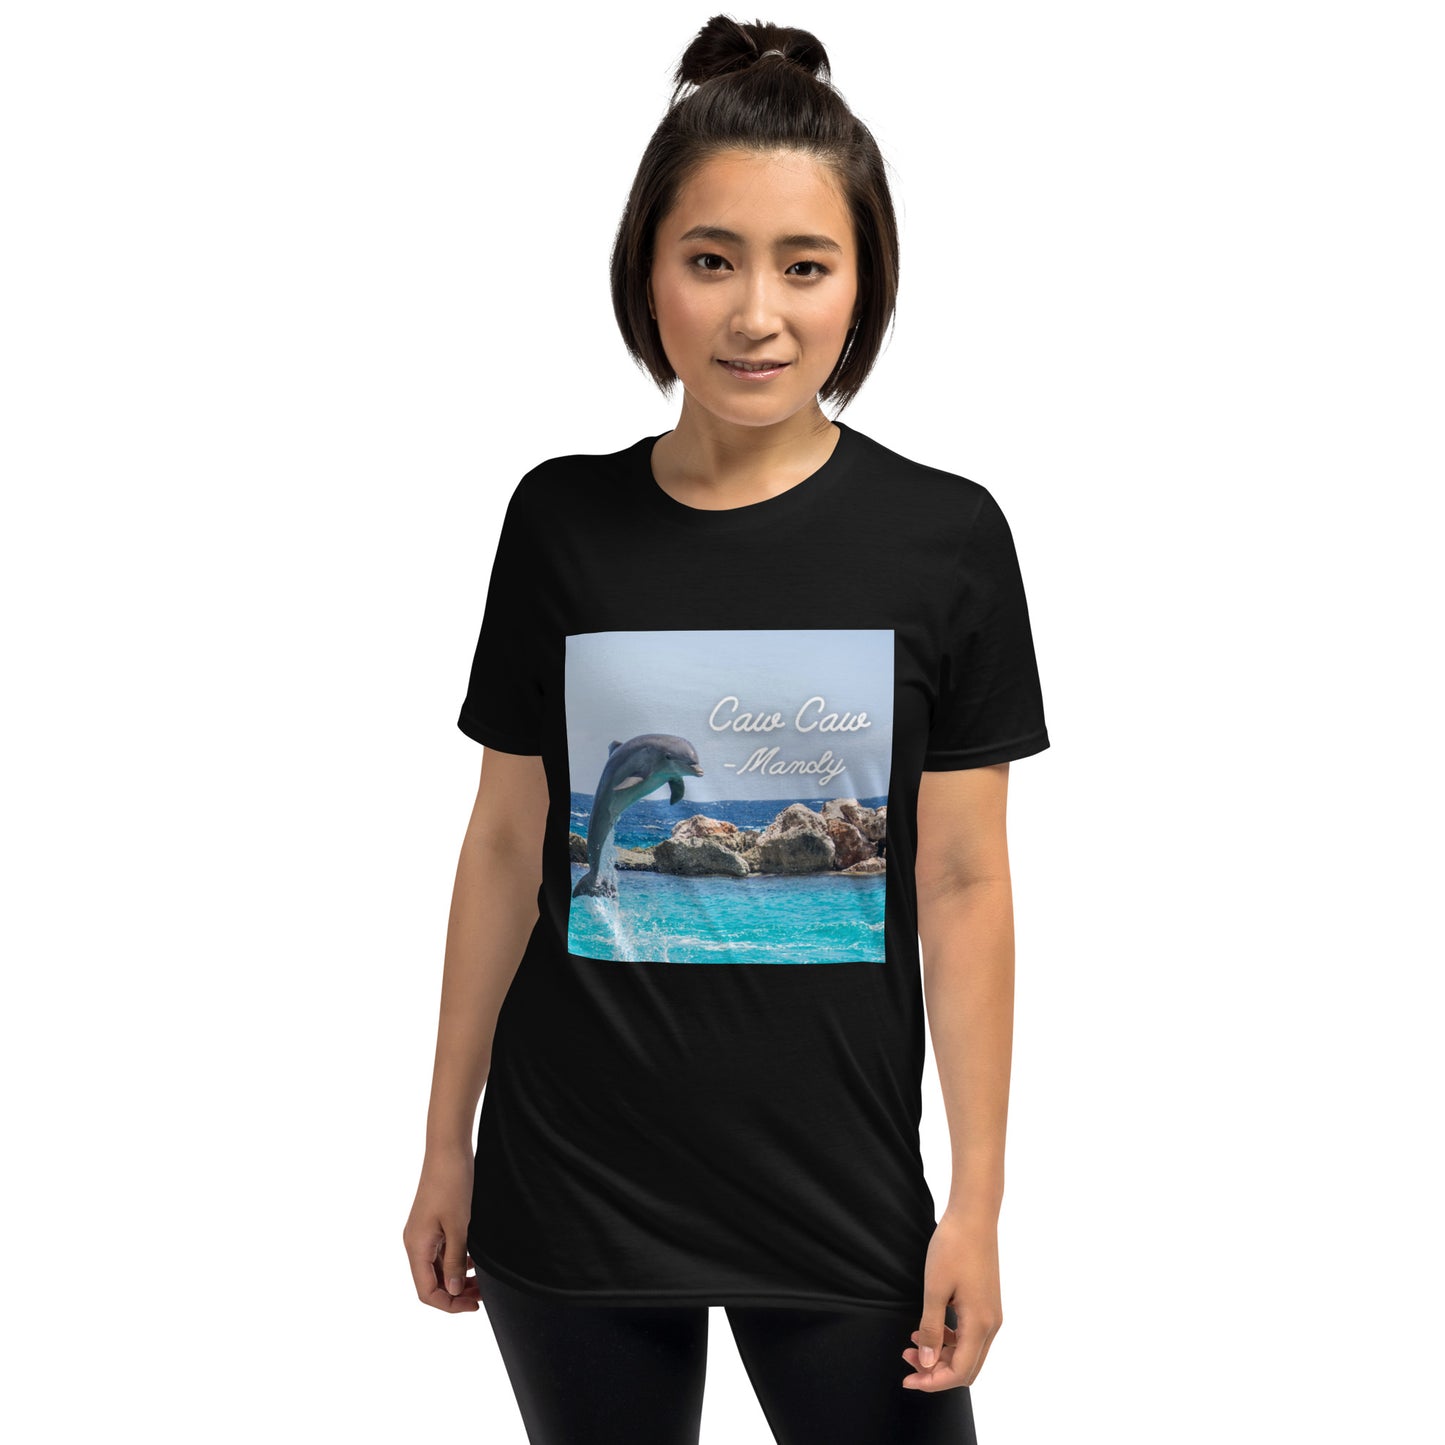 The Mandy Caw Caw T-shirt